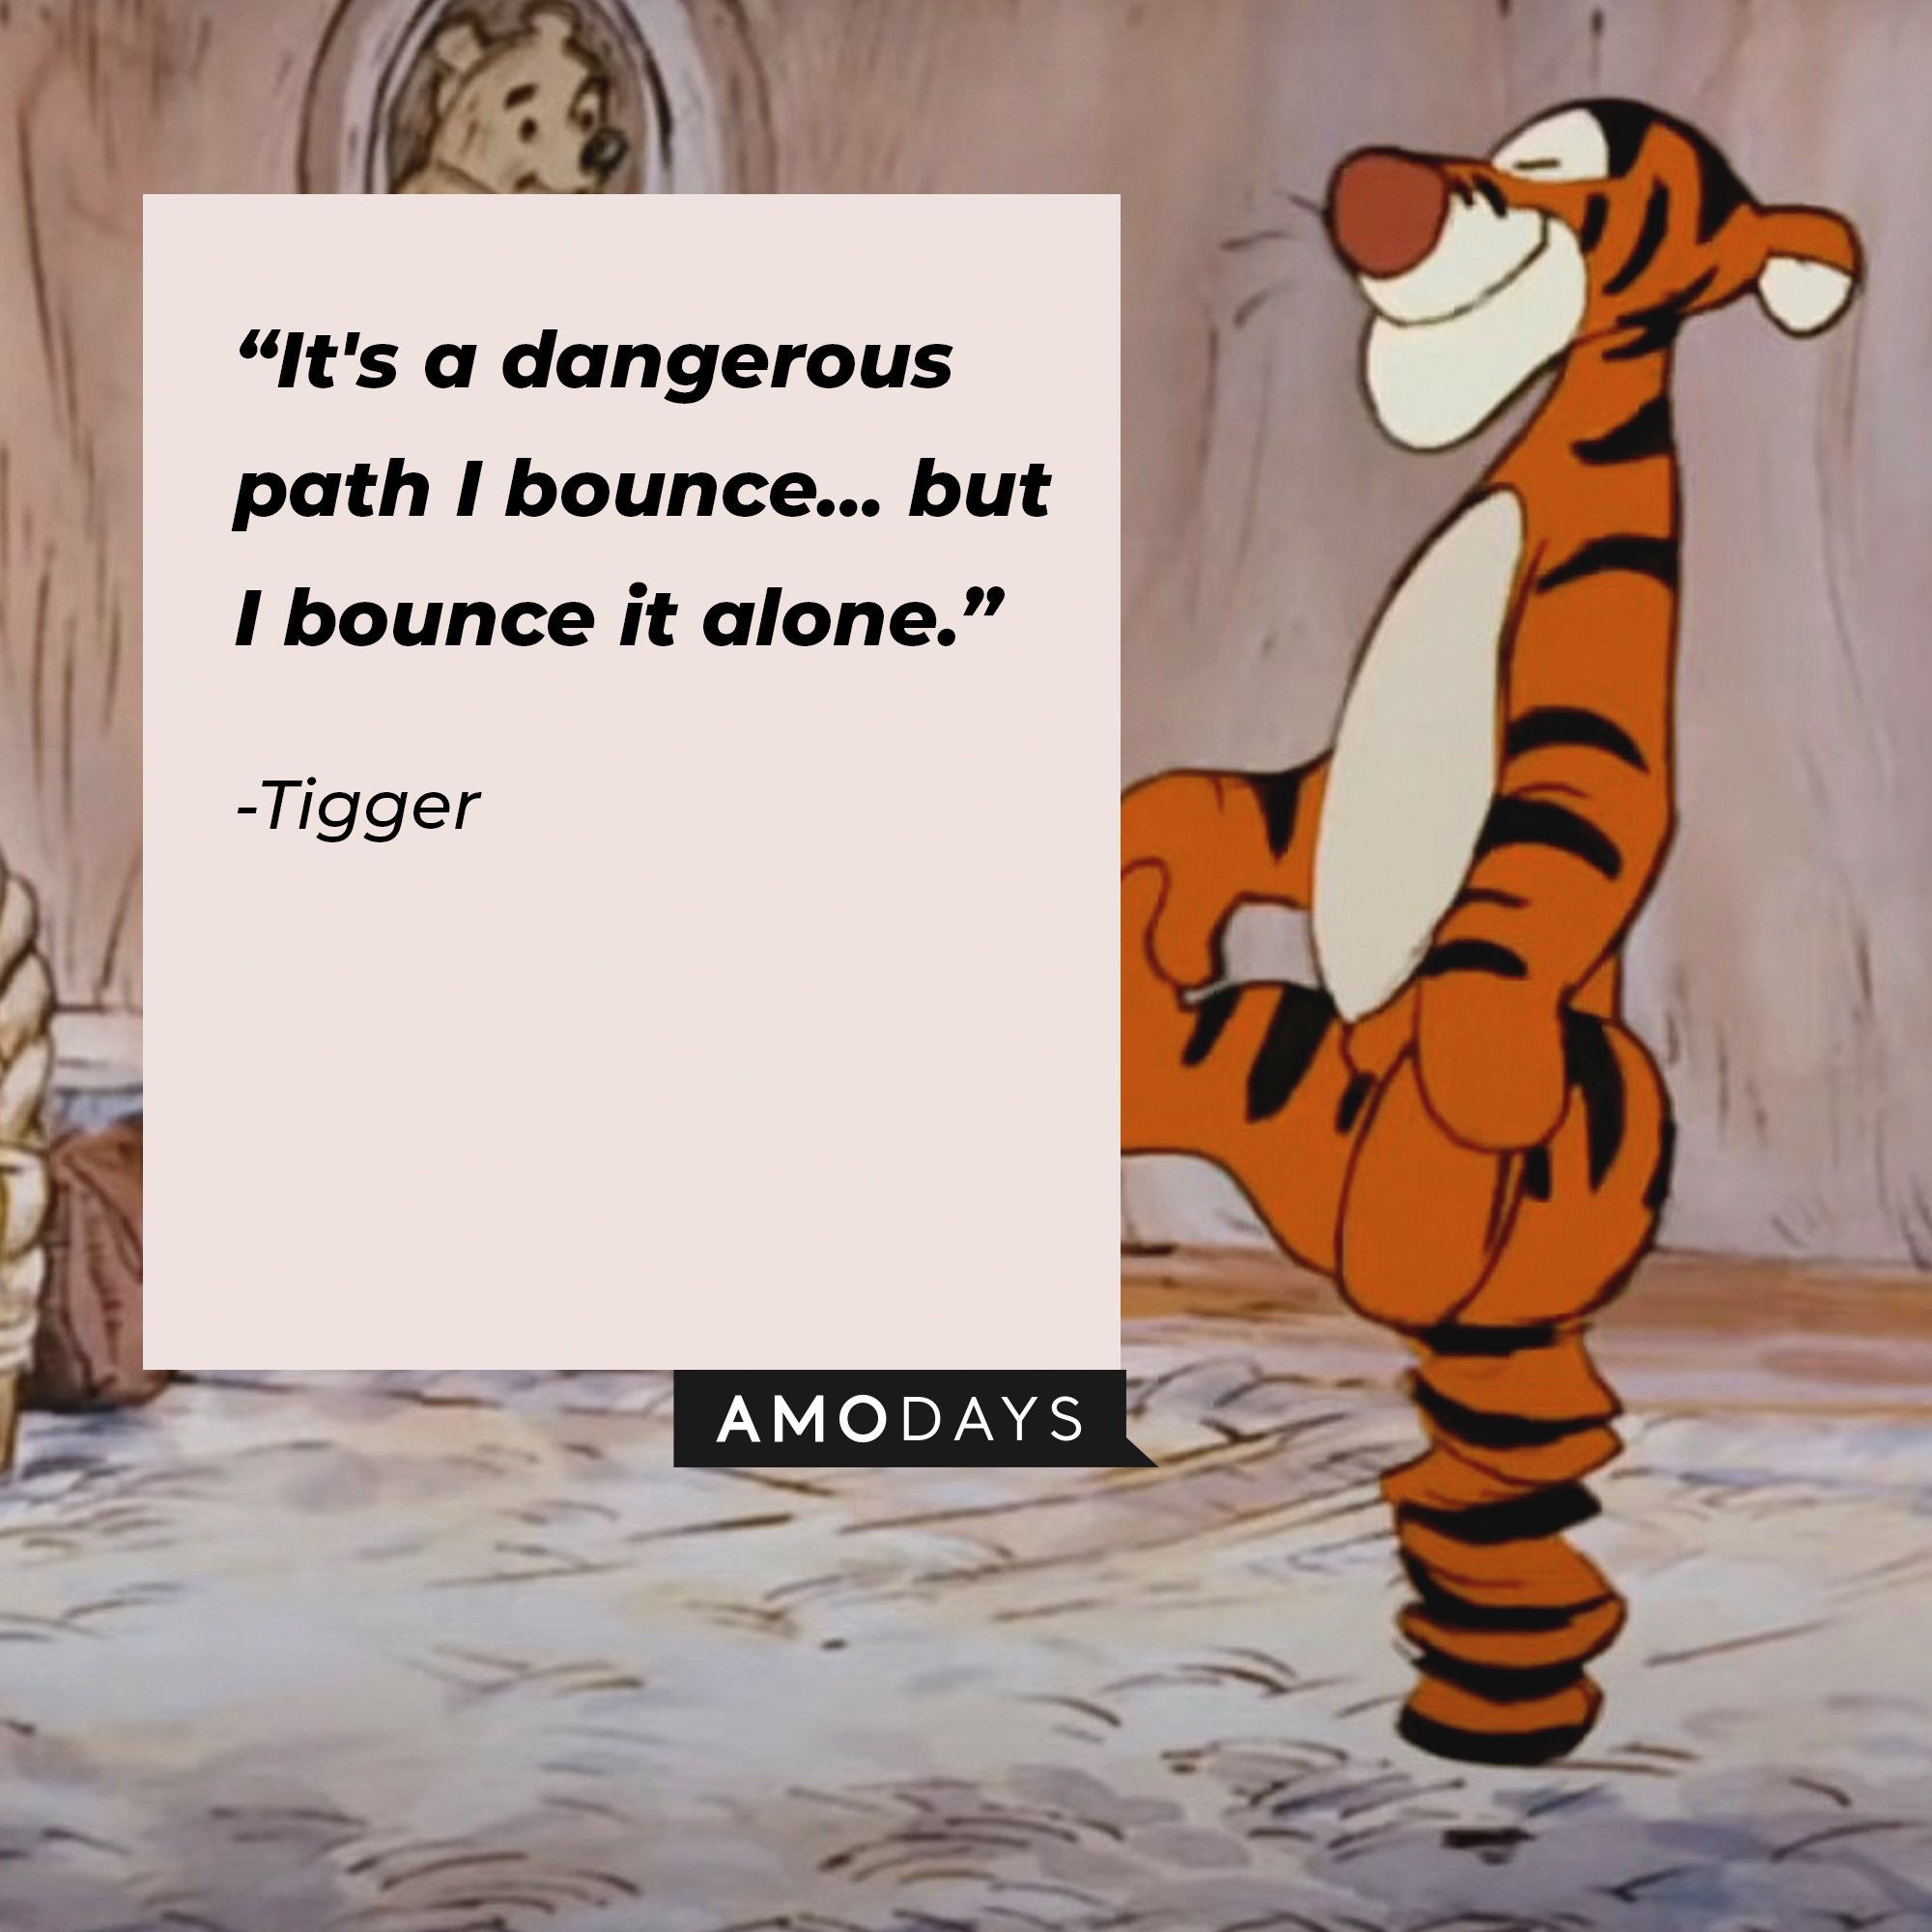 Tigger's quote: "It's a dangerous path I bounce… but I bounce it alone." | Image: AmoDays